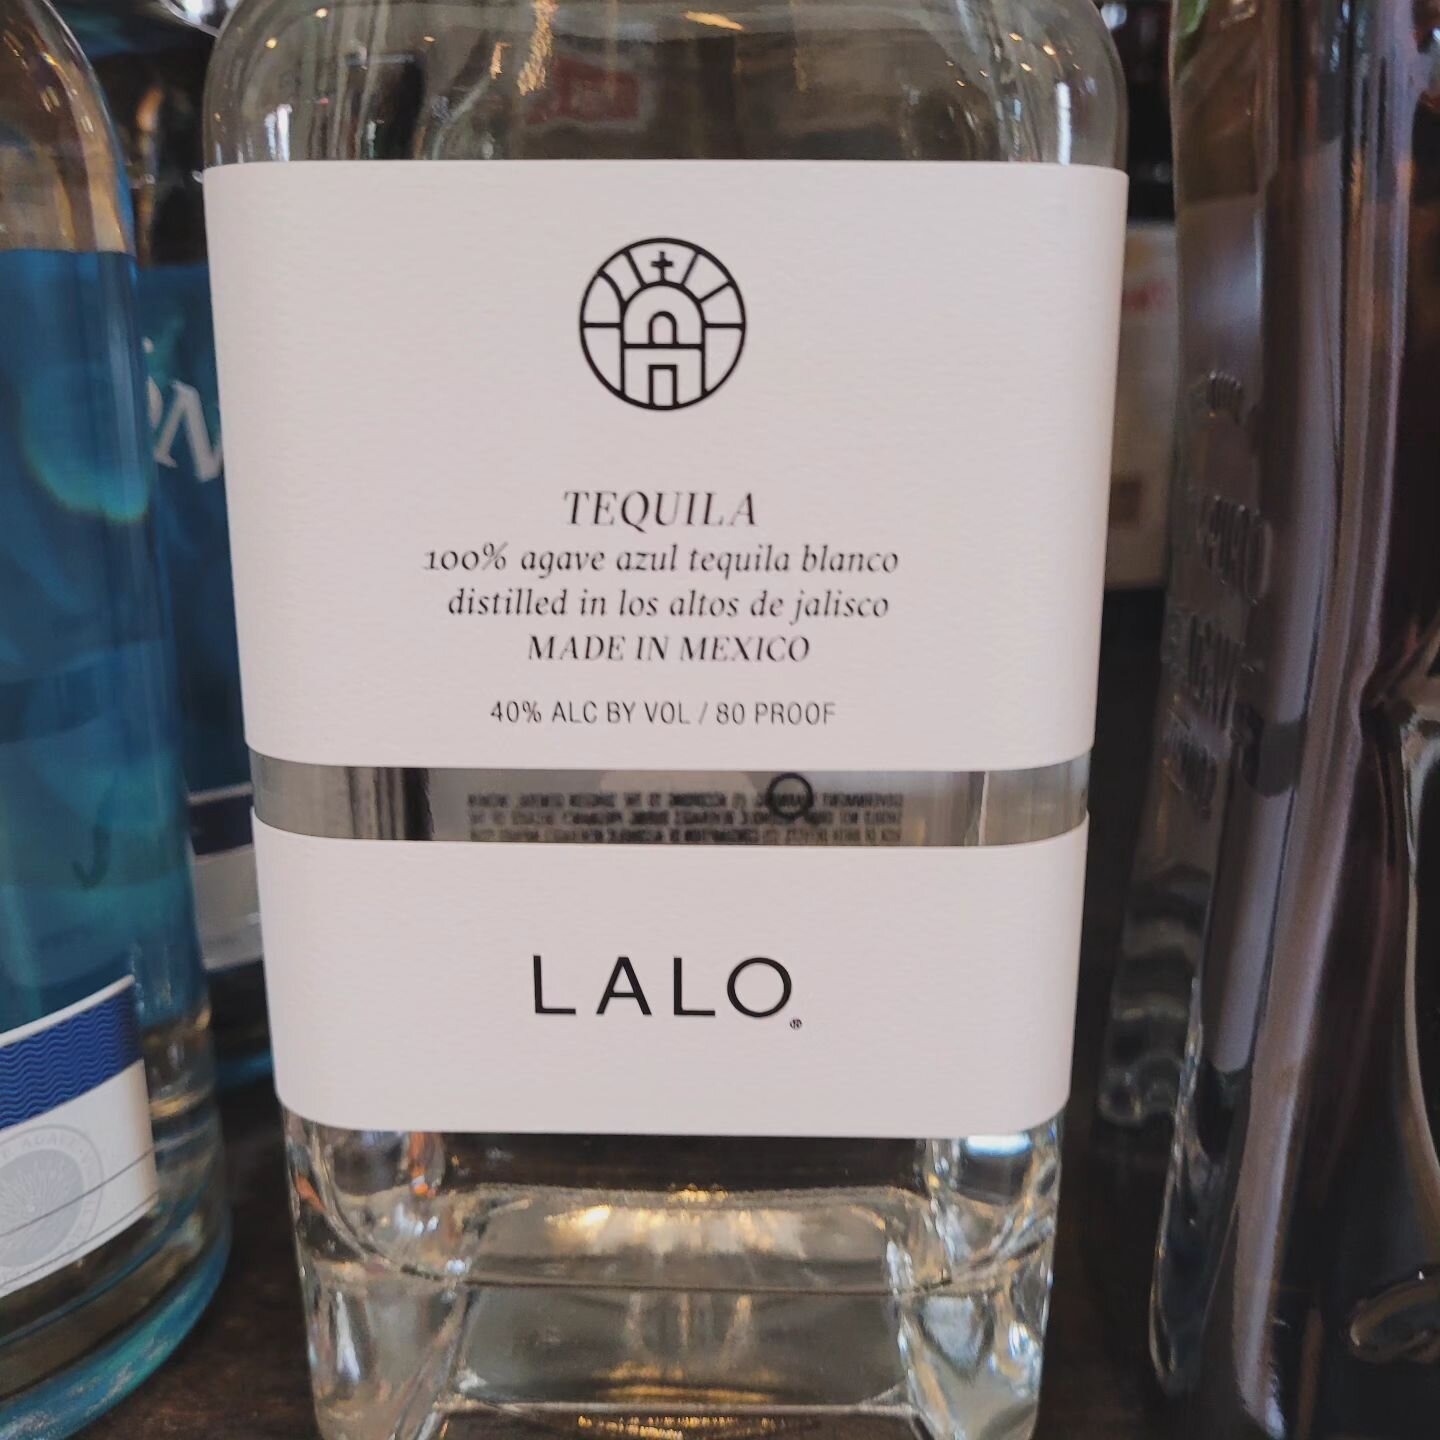 This just in! The newest product to hit our shelves is LALO! This premium tequila blanco from @lalospirits is one of the best tequilas I've tried in a long time. With delightful fruitiness, this is an easy sipper. Whether settling down after a long w